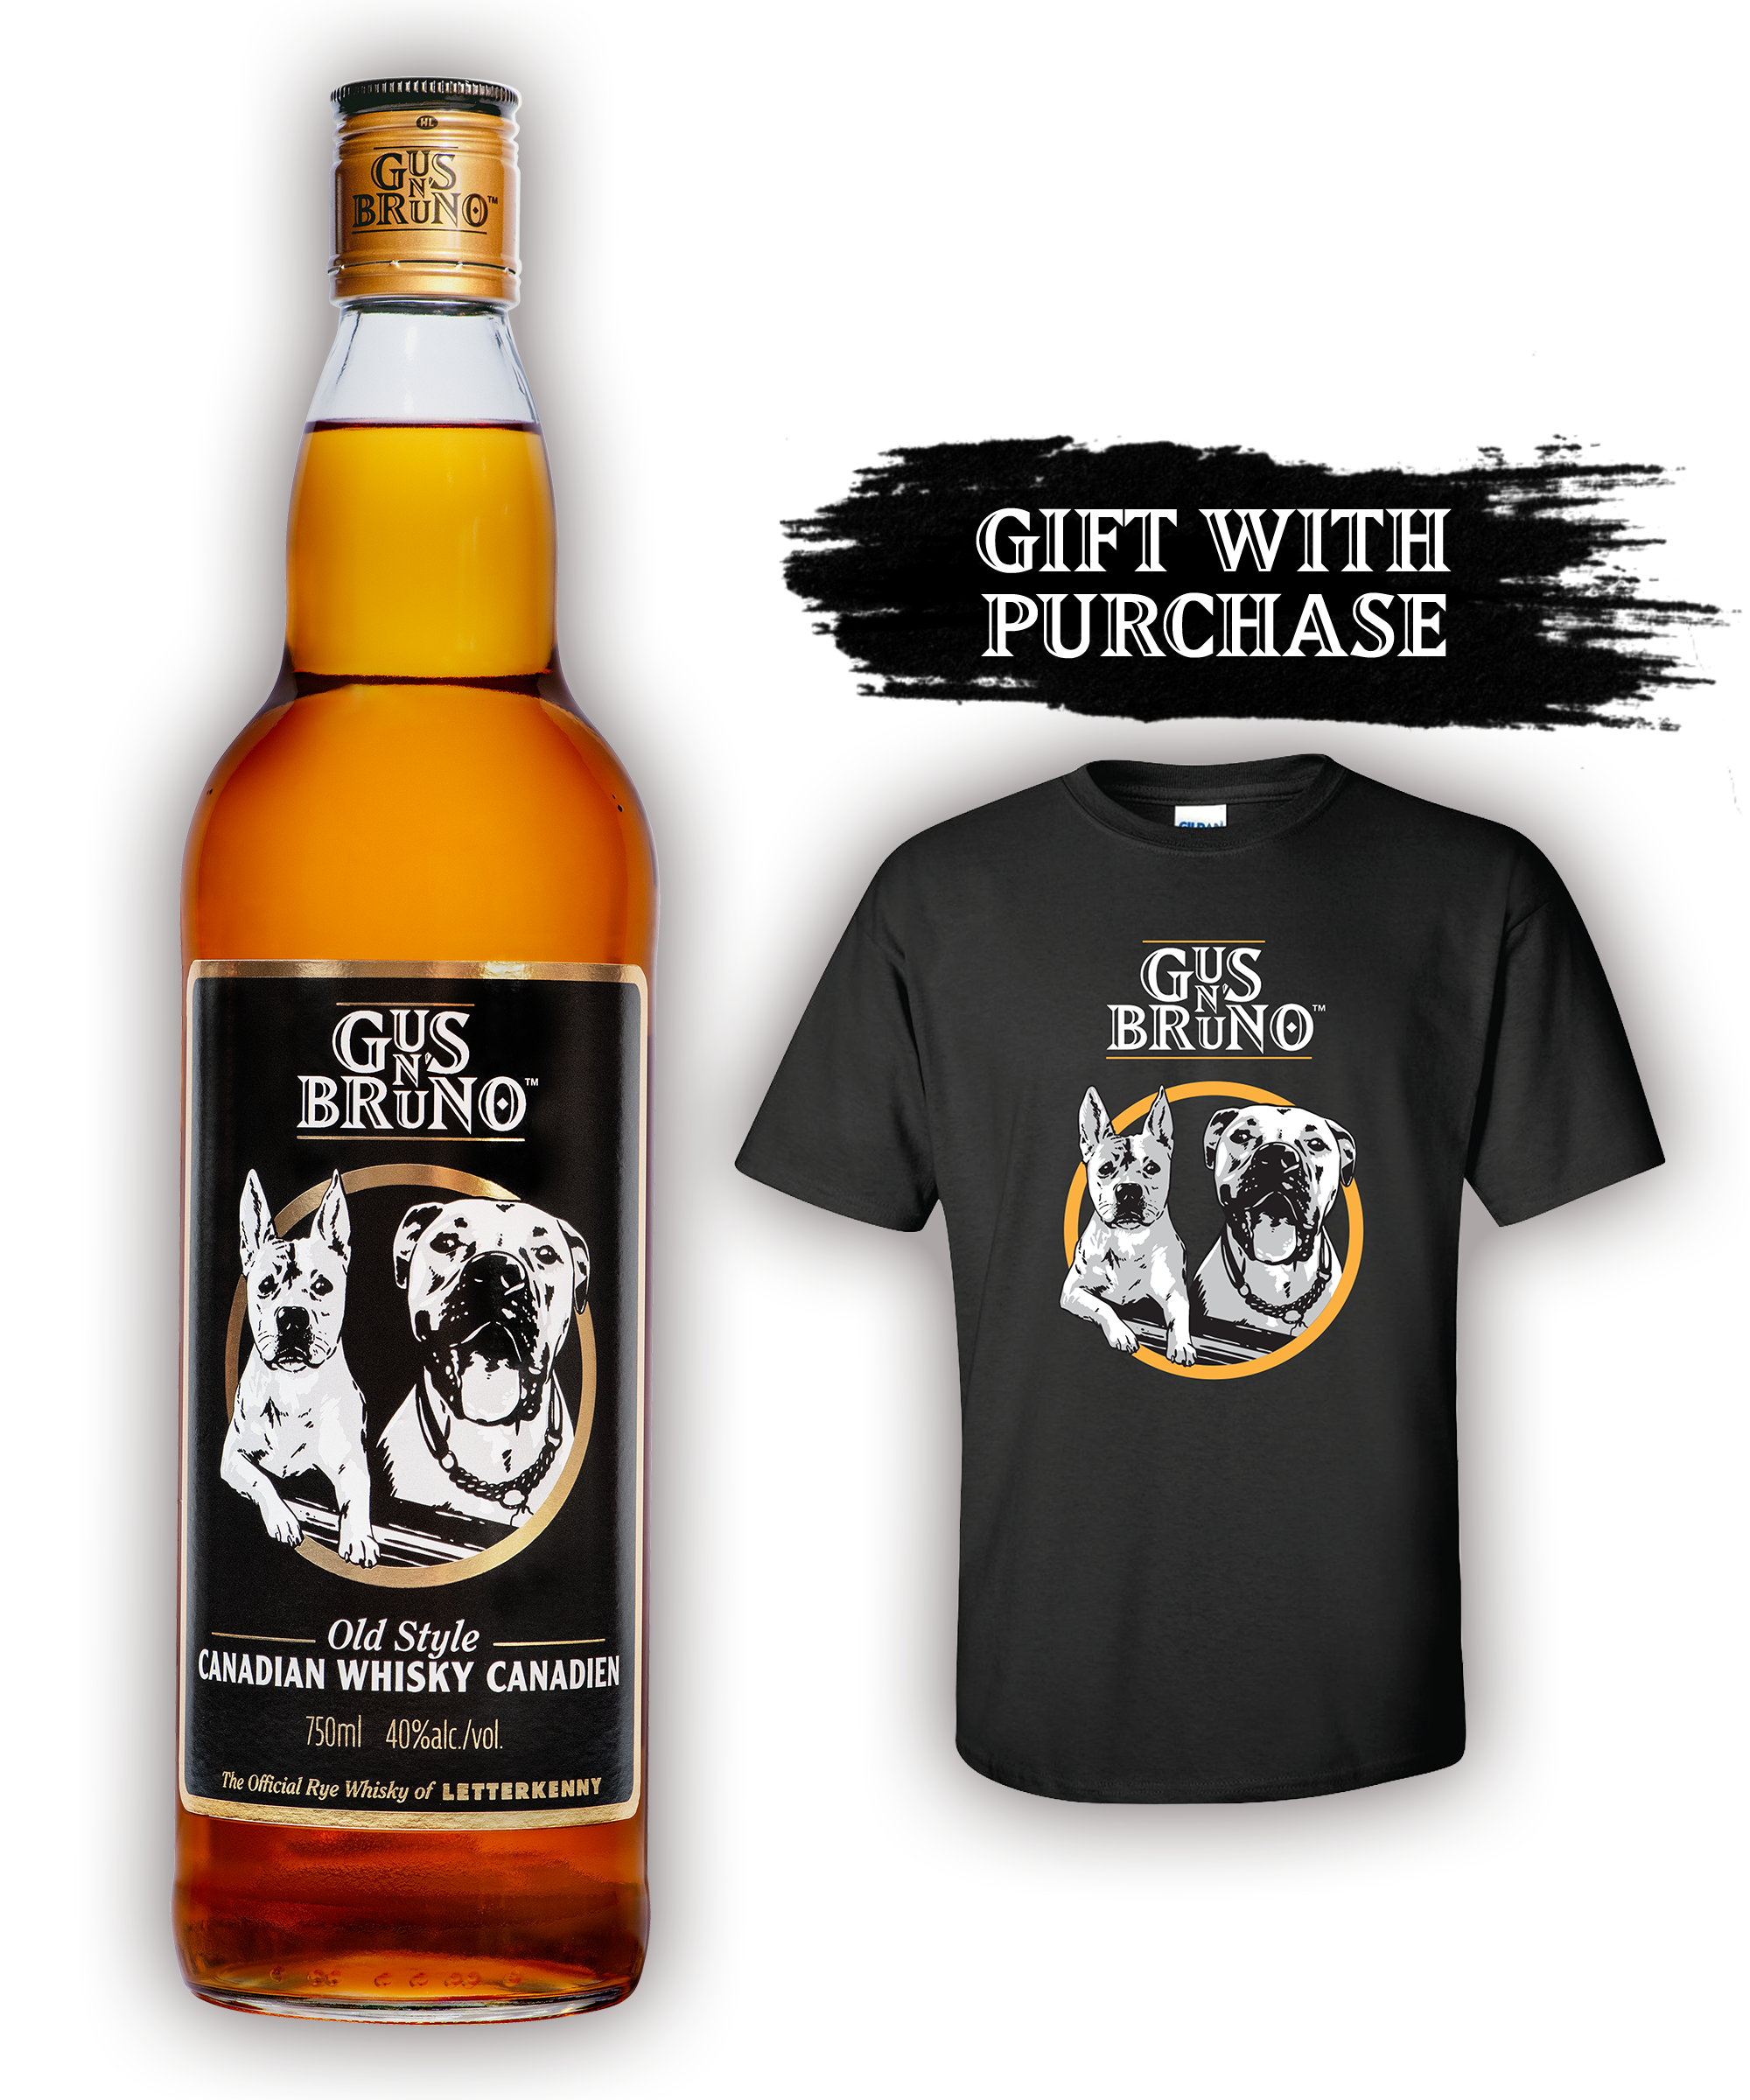 Old Style Canadian Whisky + T-Shirt